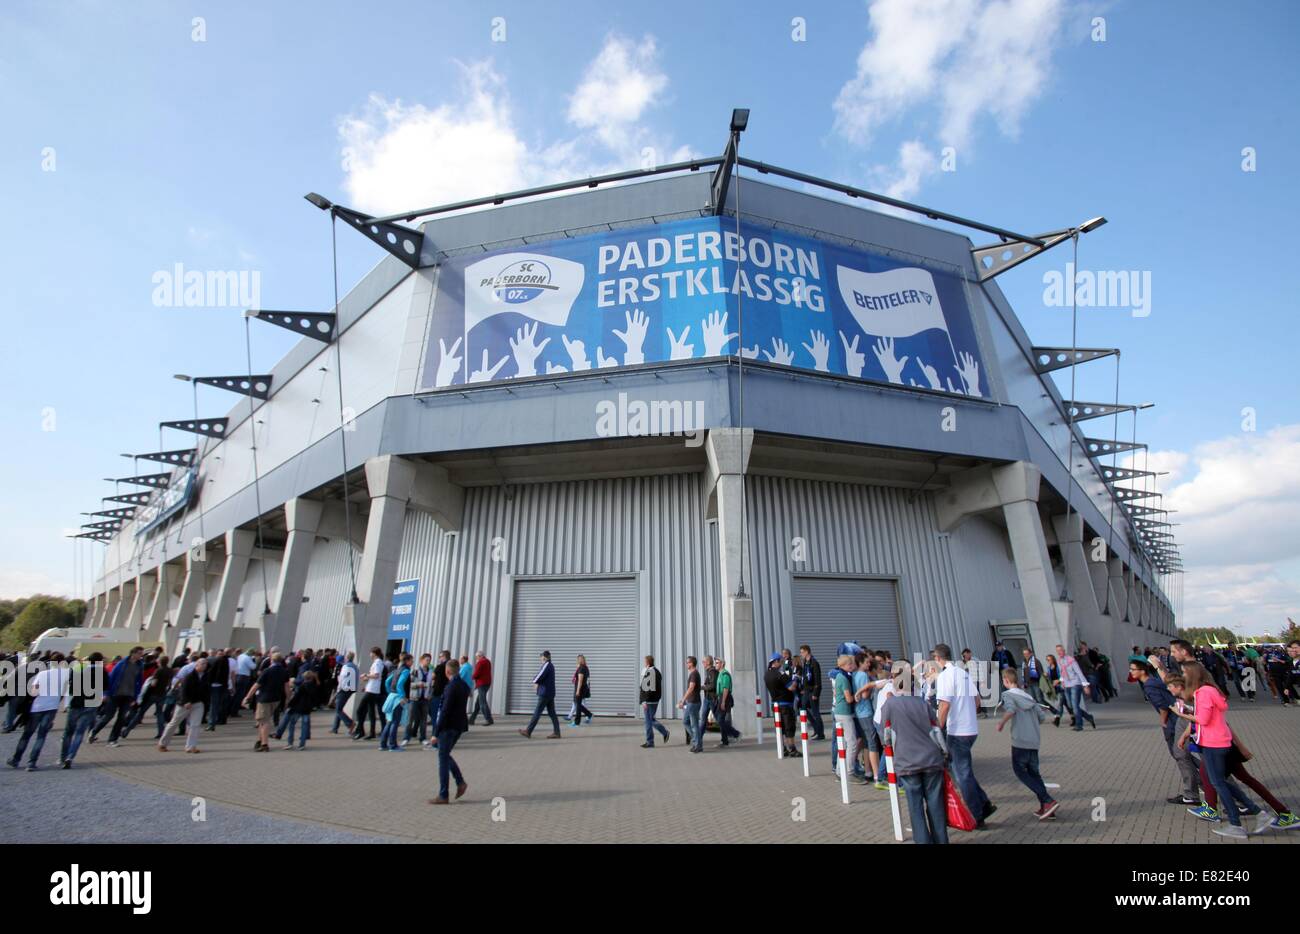 Paderborn, Germany. 27th Sep, 2014. Bundesliga soccer match between SC Paderborn and Borussia Moenchengladbach in the Benteler Arena in Paderborn, Germany, 27 September 2014. The picture shows the Benteler Arena. PHOTO: OLIVER KRATO/DPA/Alamy Live News Stock Photo